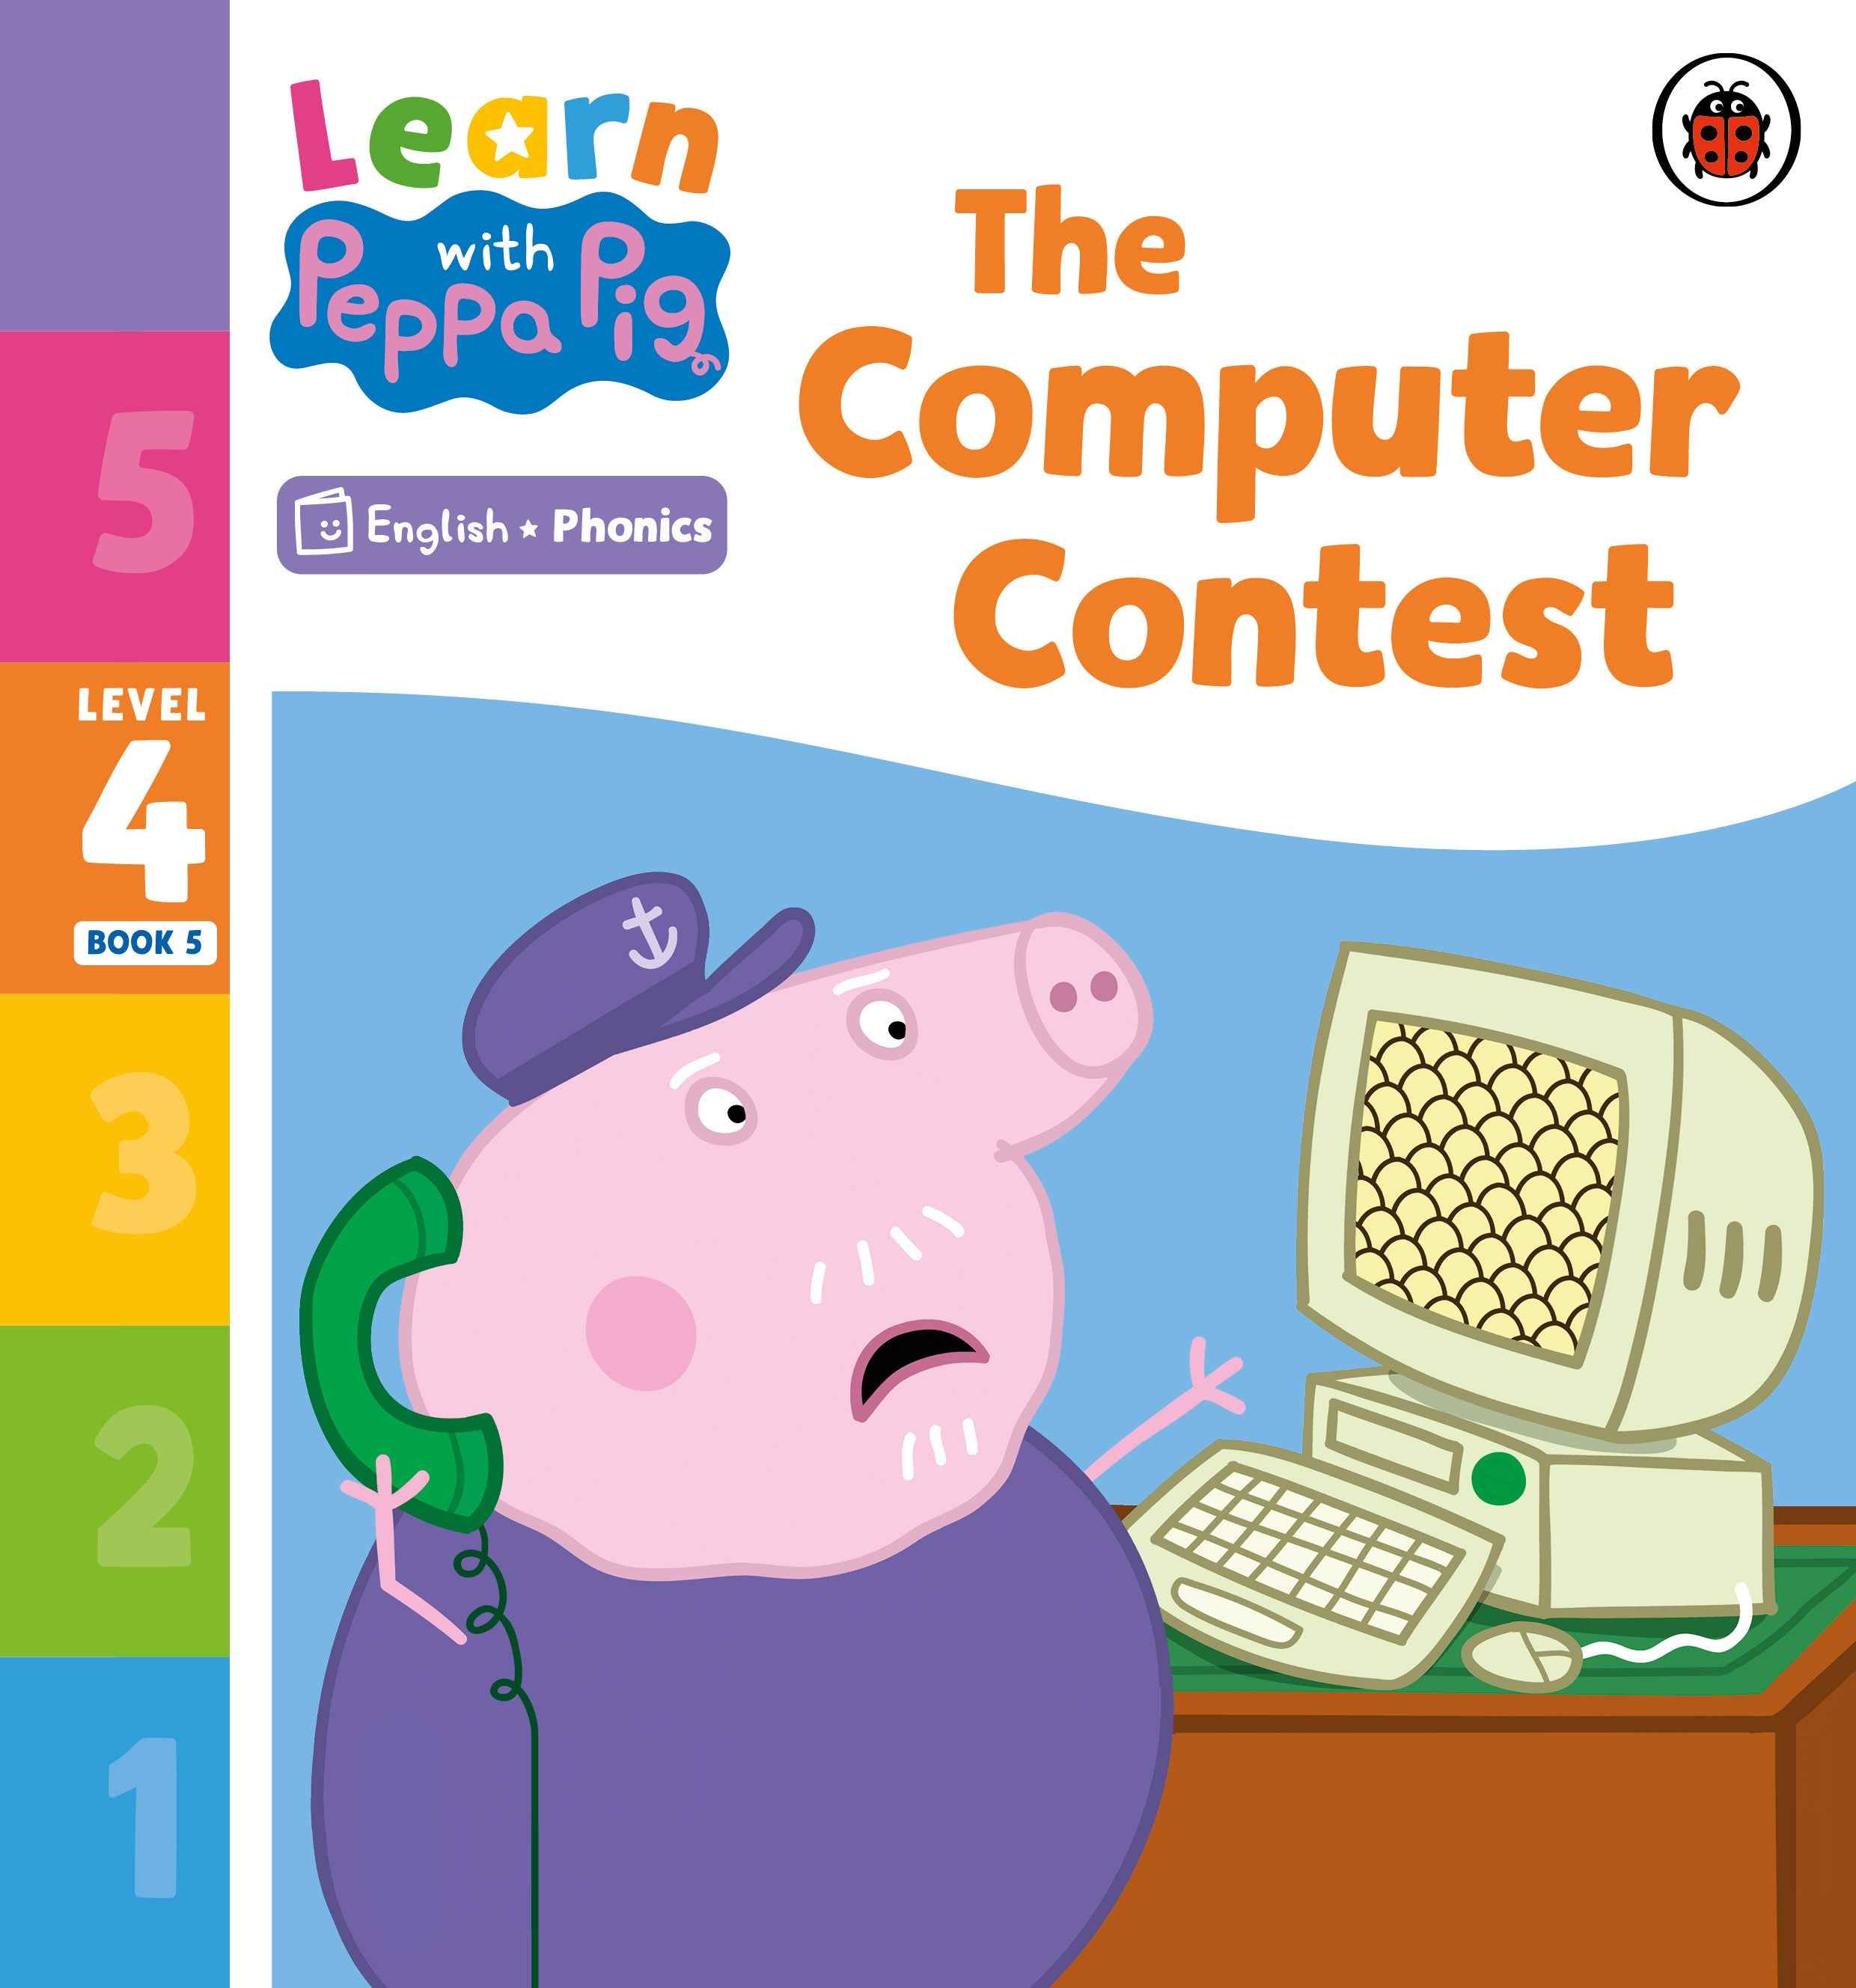 The Computer Contest